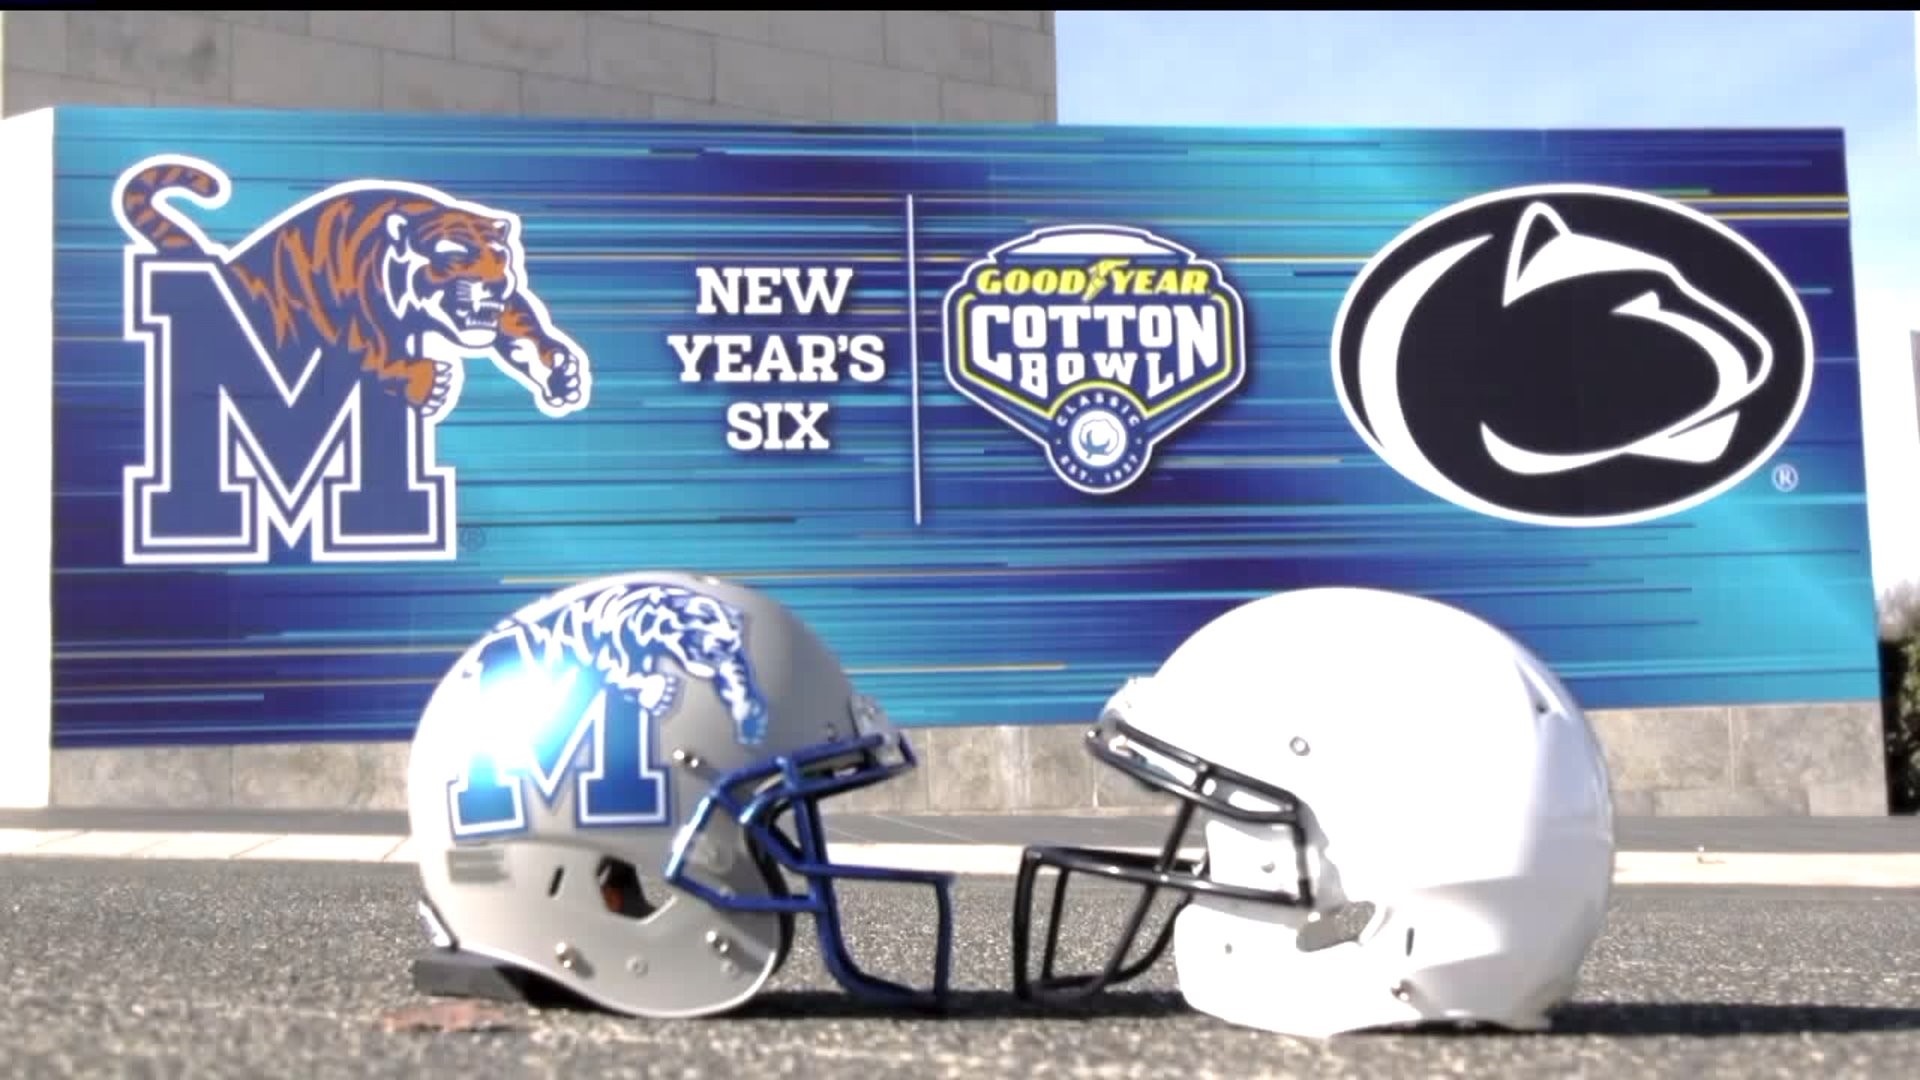 The respect is mutual for Penn State and Memphis as the Cotton Bowl nears